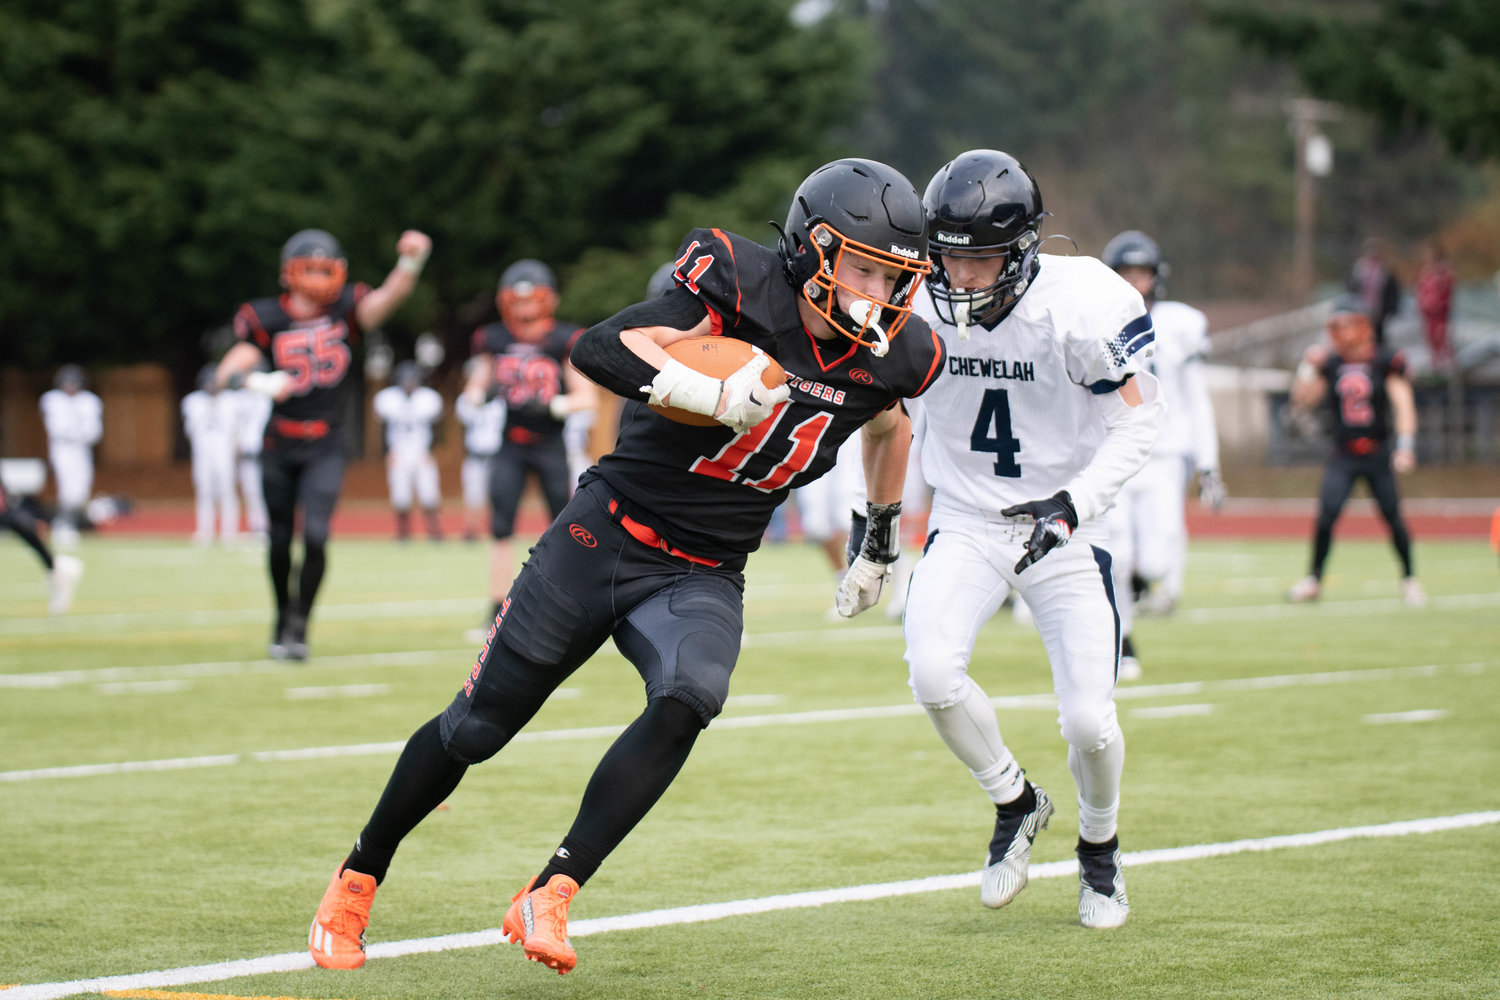 Colin Shields turns into the end zone for a 7-yard touchdown during the first half of Napavine's 2B semifinal win over Chewelah at Tumwater on Nov. 26.